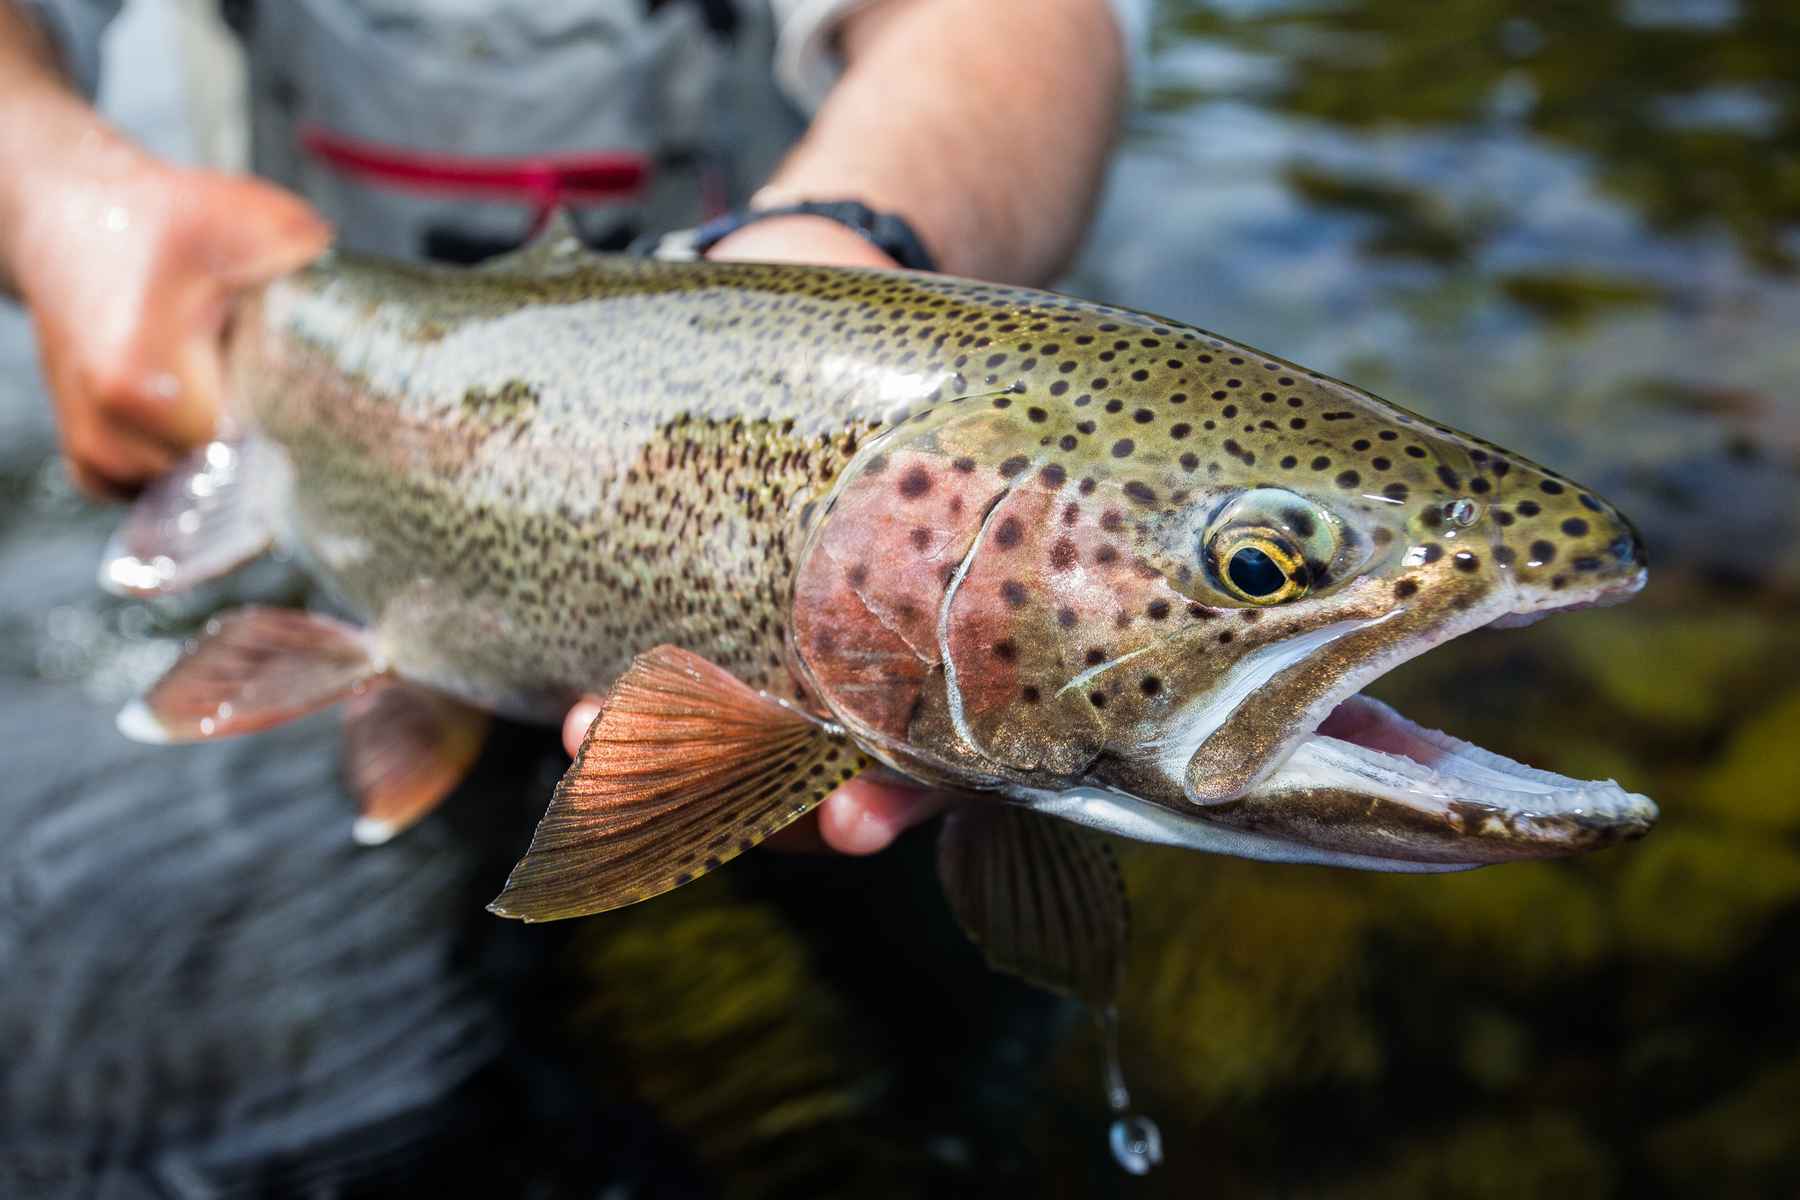 Atop the Angling Mountain: The Five Stages of Fly Fishing